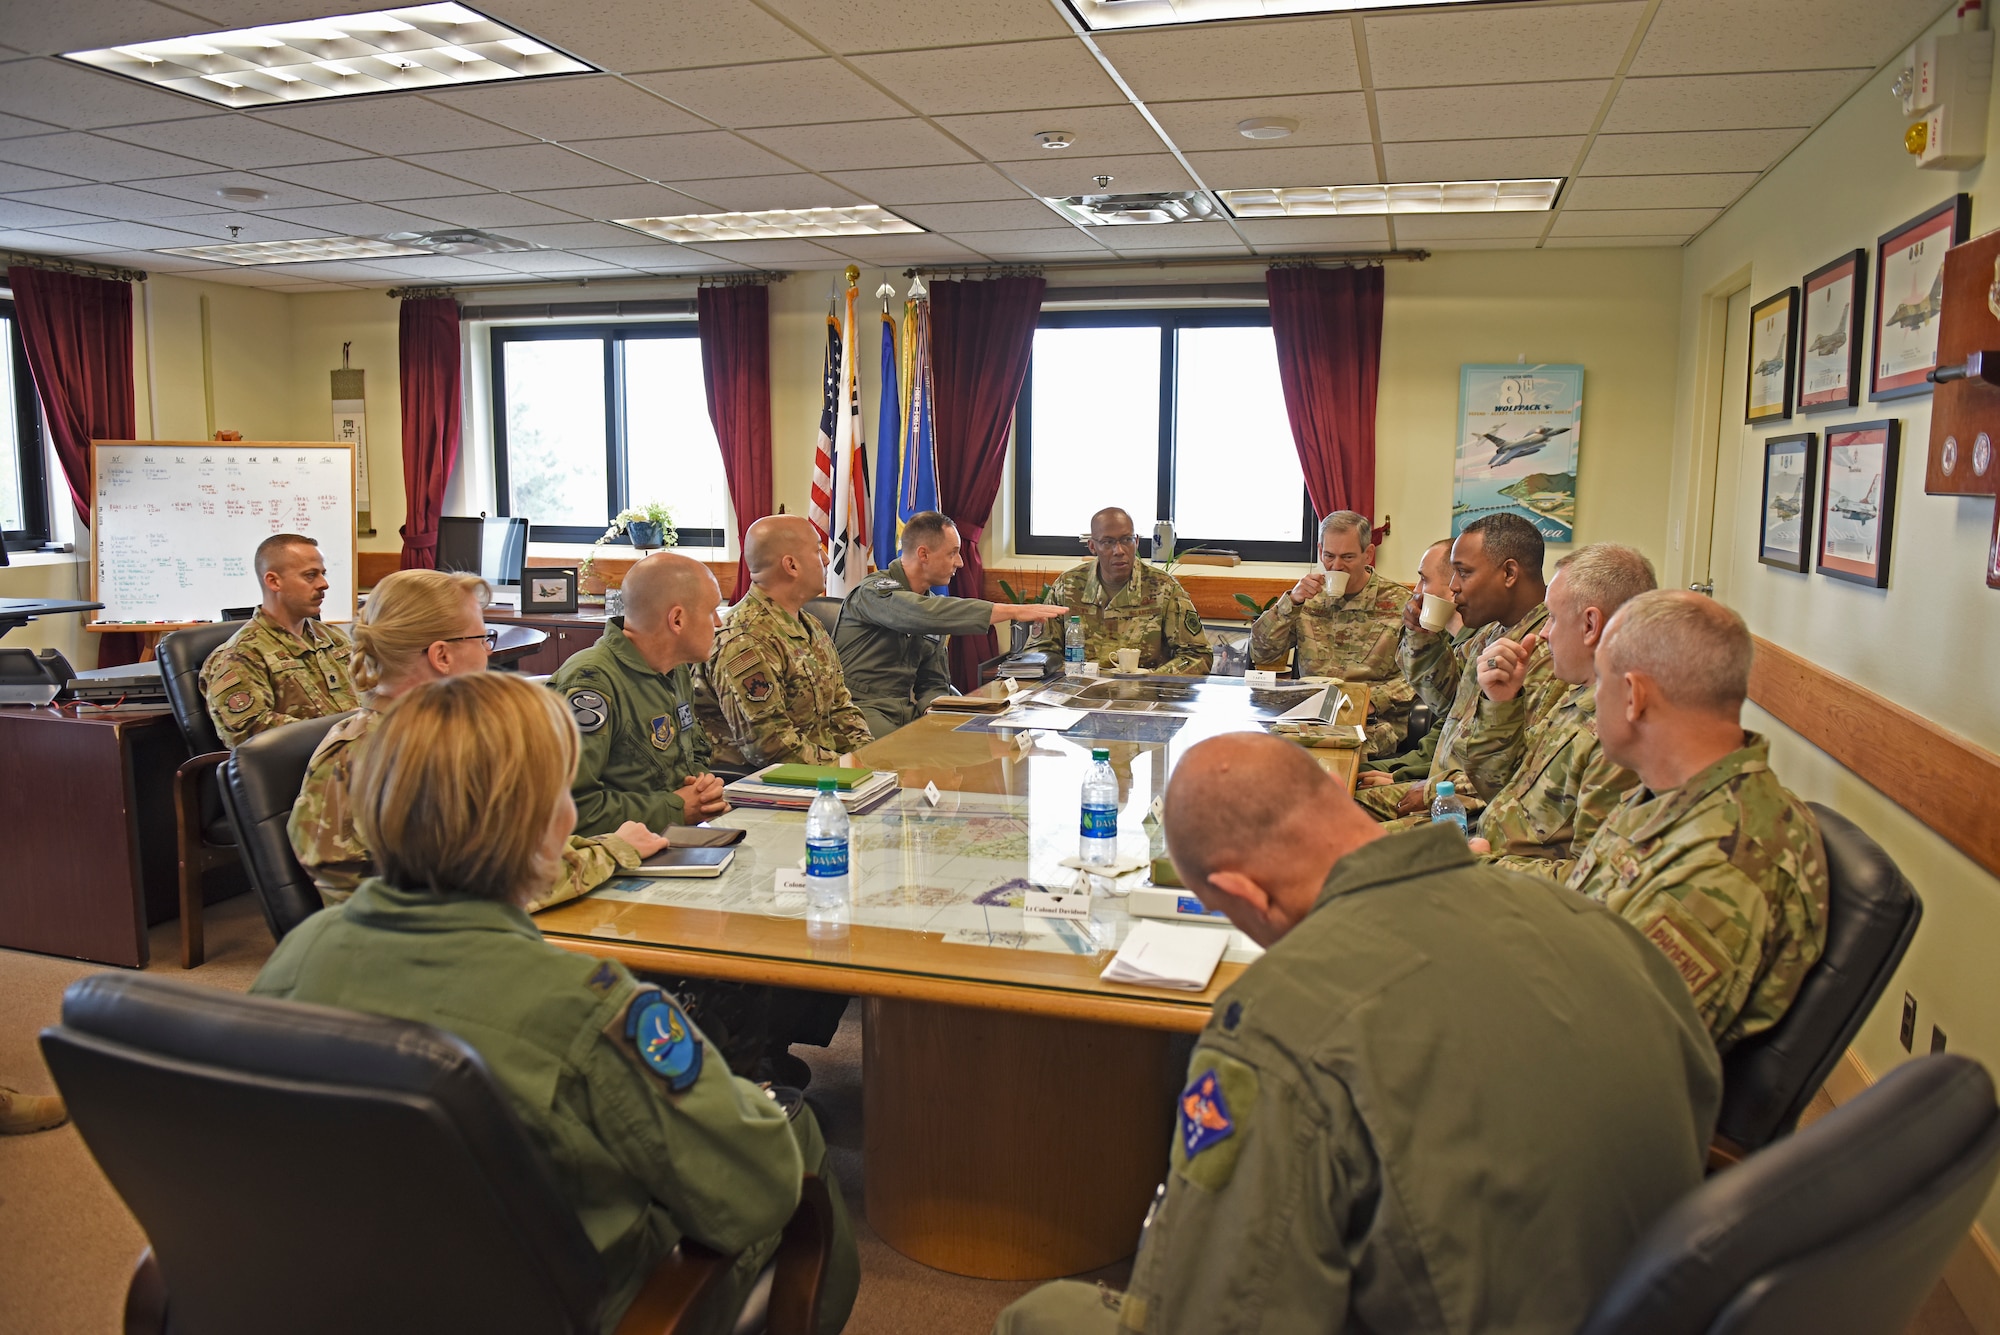 U.S. Air Force Gen. CQ Brown, Jr. Pacific Air Forces commander, and Lt. Gen. Kenneth Wilsbach, Seventh Air Force commander, talk with 8th Fighter Wing leaders at Kunsan Air Base, Republic of Korea, Oct. 18, 2019. PACAF is responsible for delivering agile air, space and cyberspace capabilities in support of U.S. Indo-Pacific Command’s objectives while uniting allies and partners to enhance regional stability. (U.S. Air Force photo by Staff Sgt. Mackenzie Mendez)